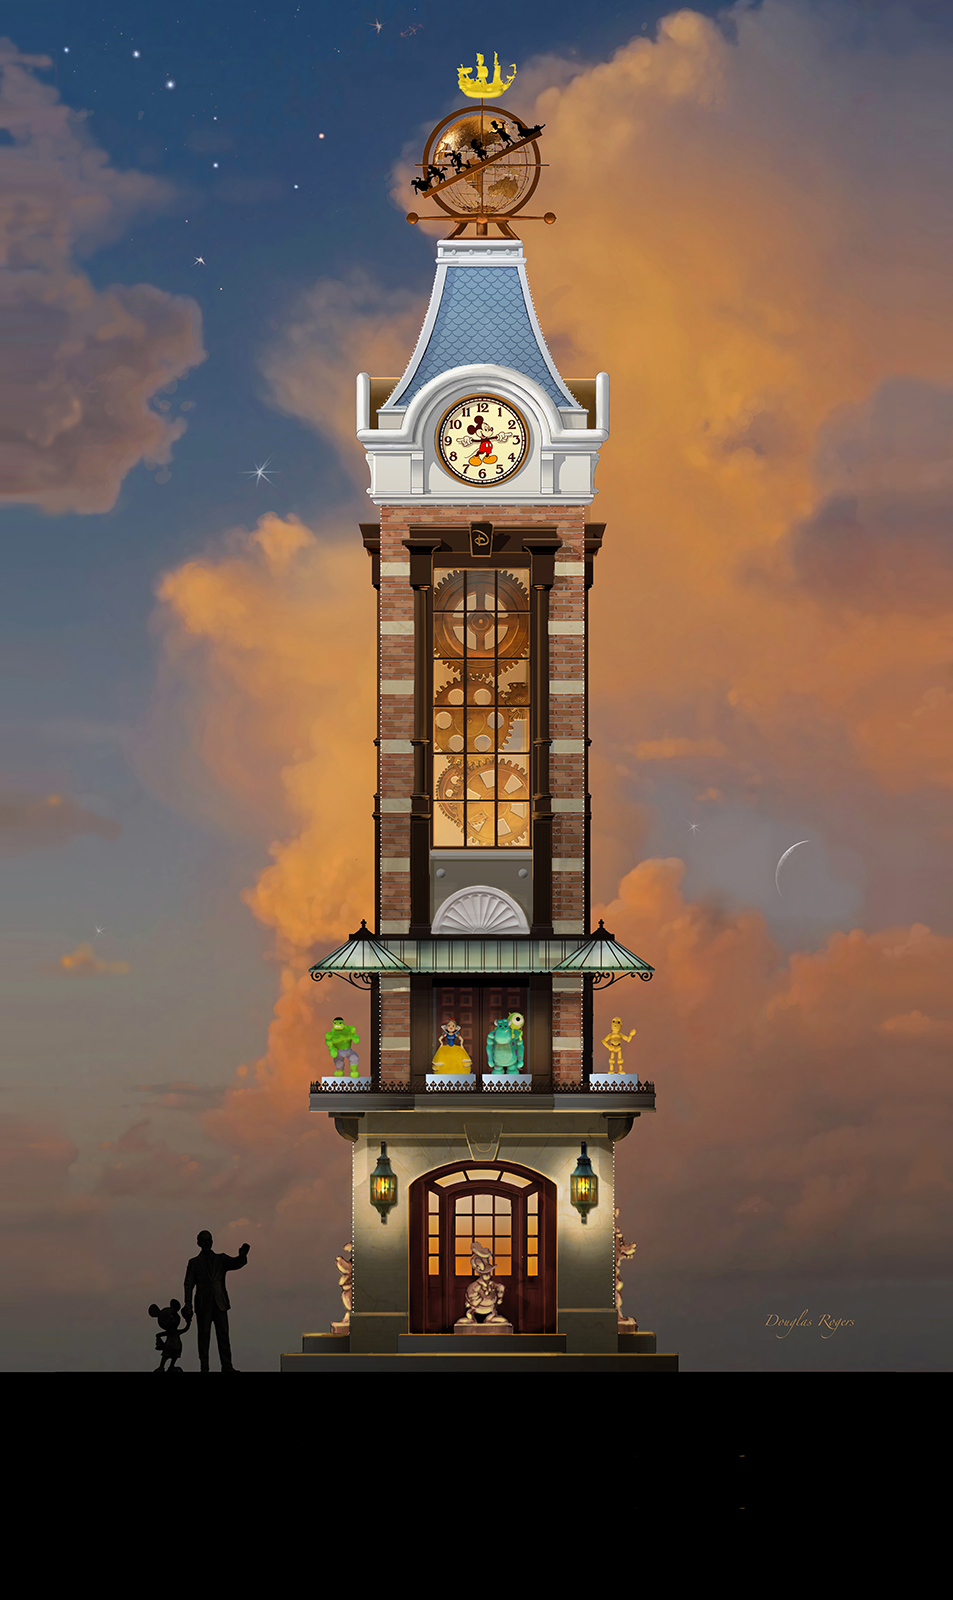 Rogers and fellow alum Stephen Cargile, BFA '97, were part of a three-person team that designed a 60-foot glockenspiel-style clock tower for the Shanghai Disney Store.